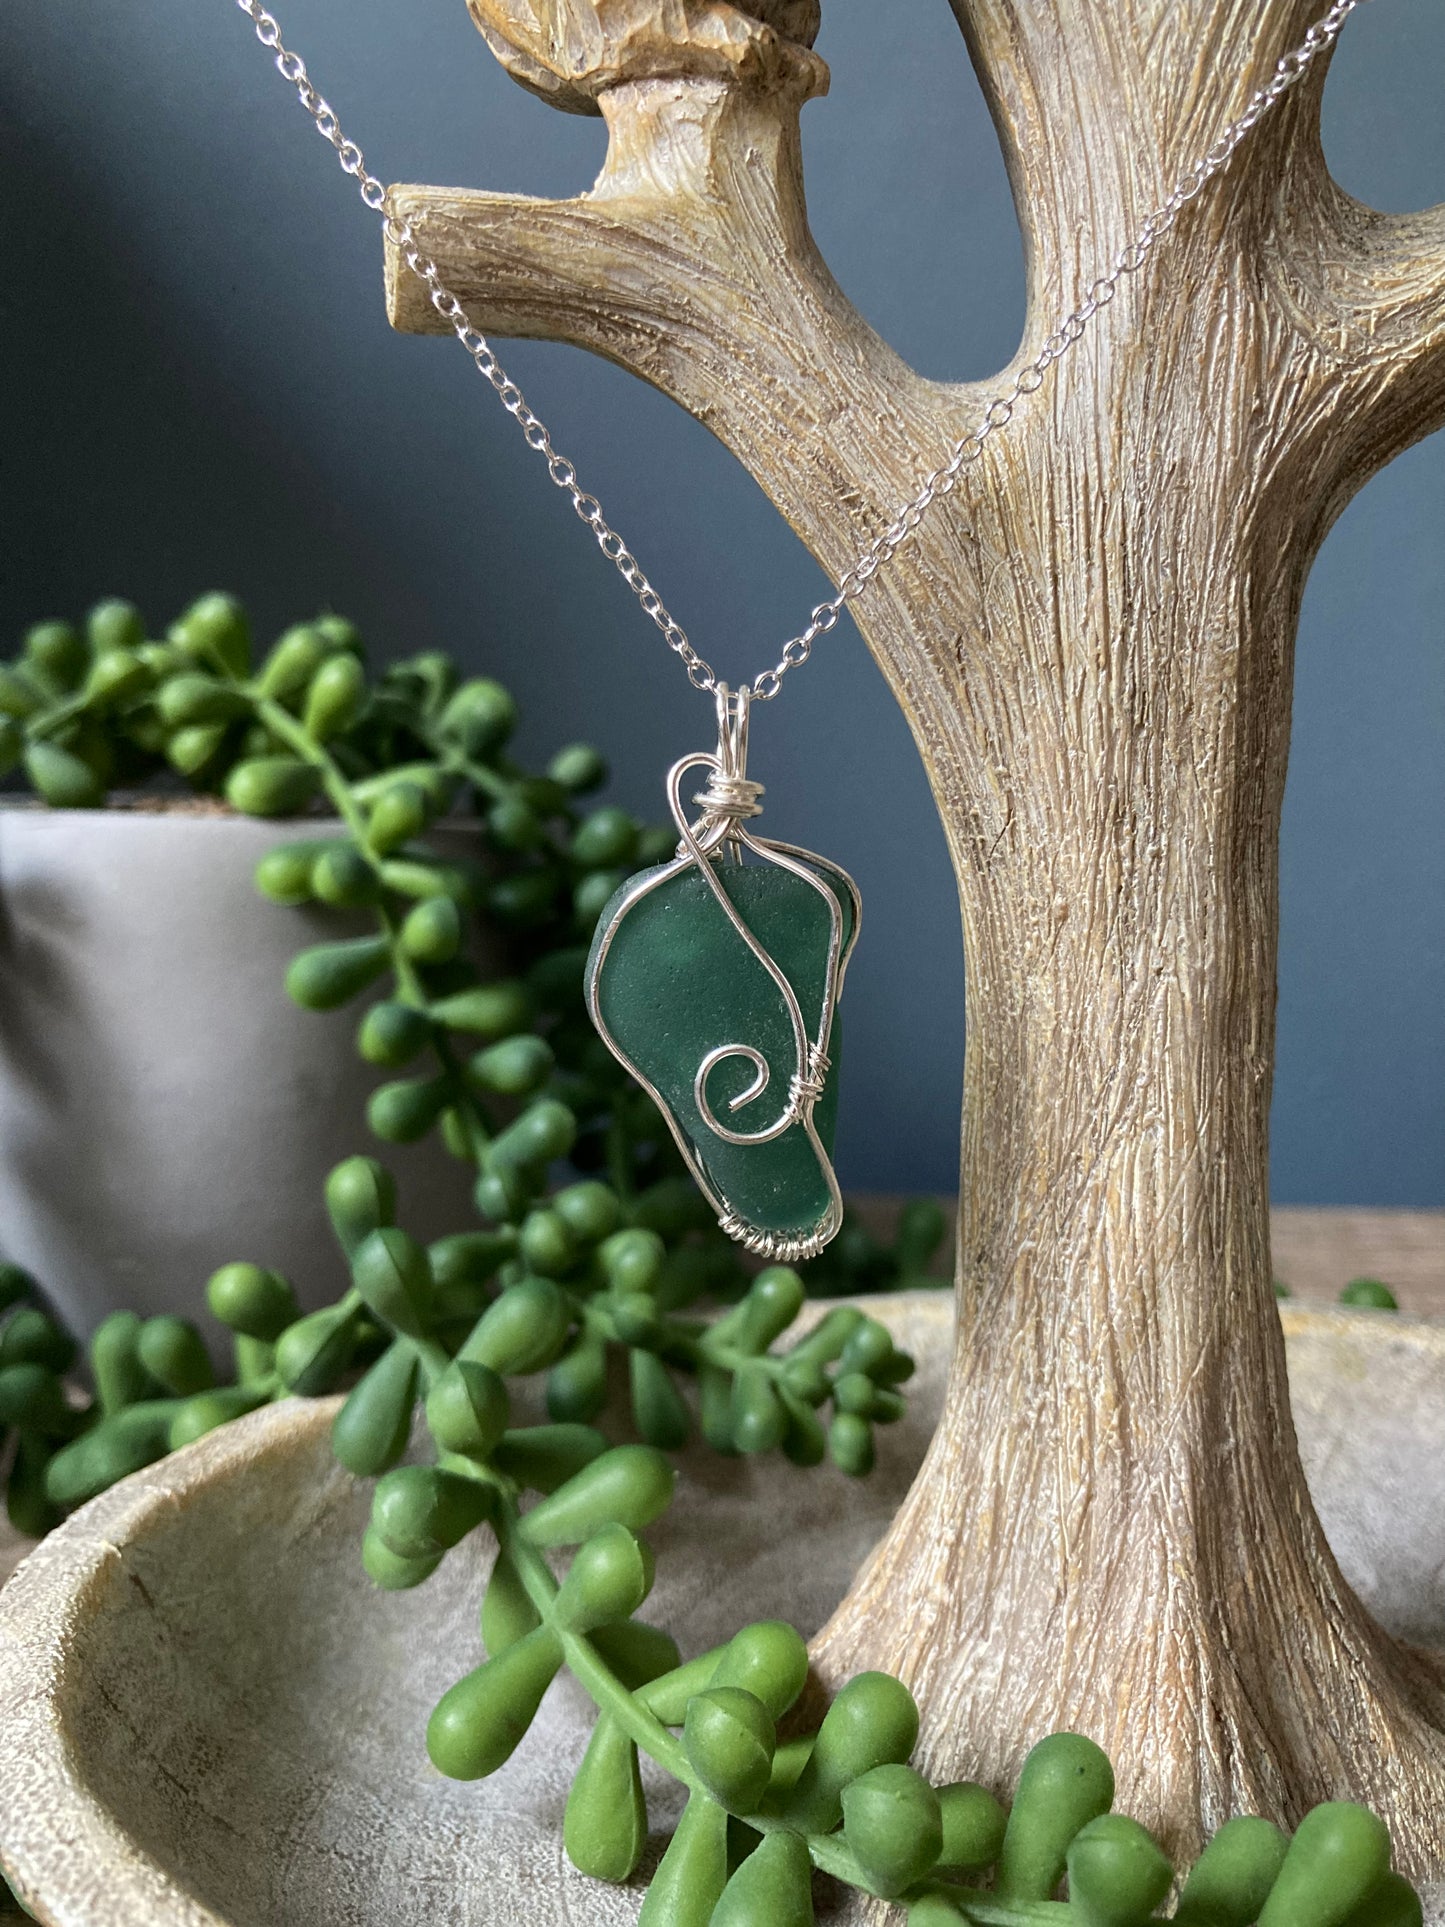 Teal green sea glass silver plated necklace